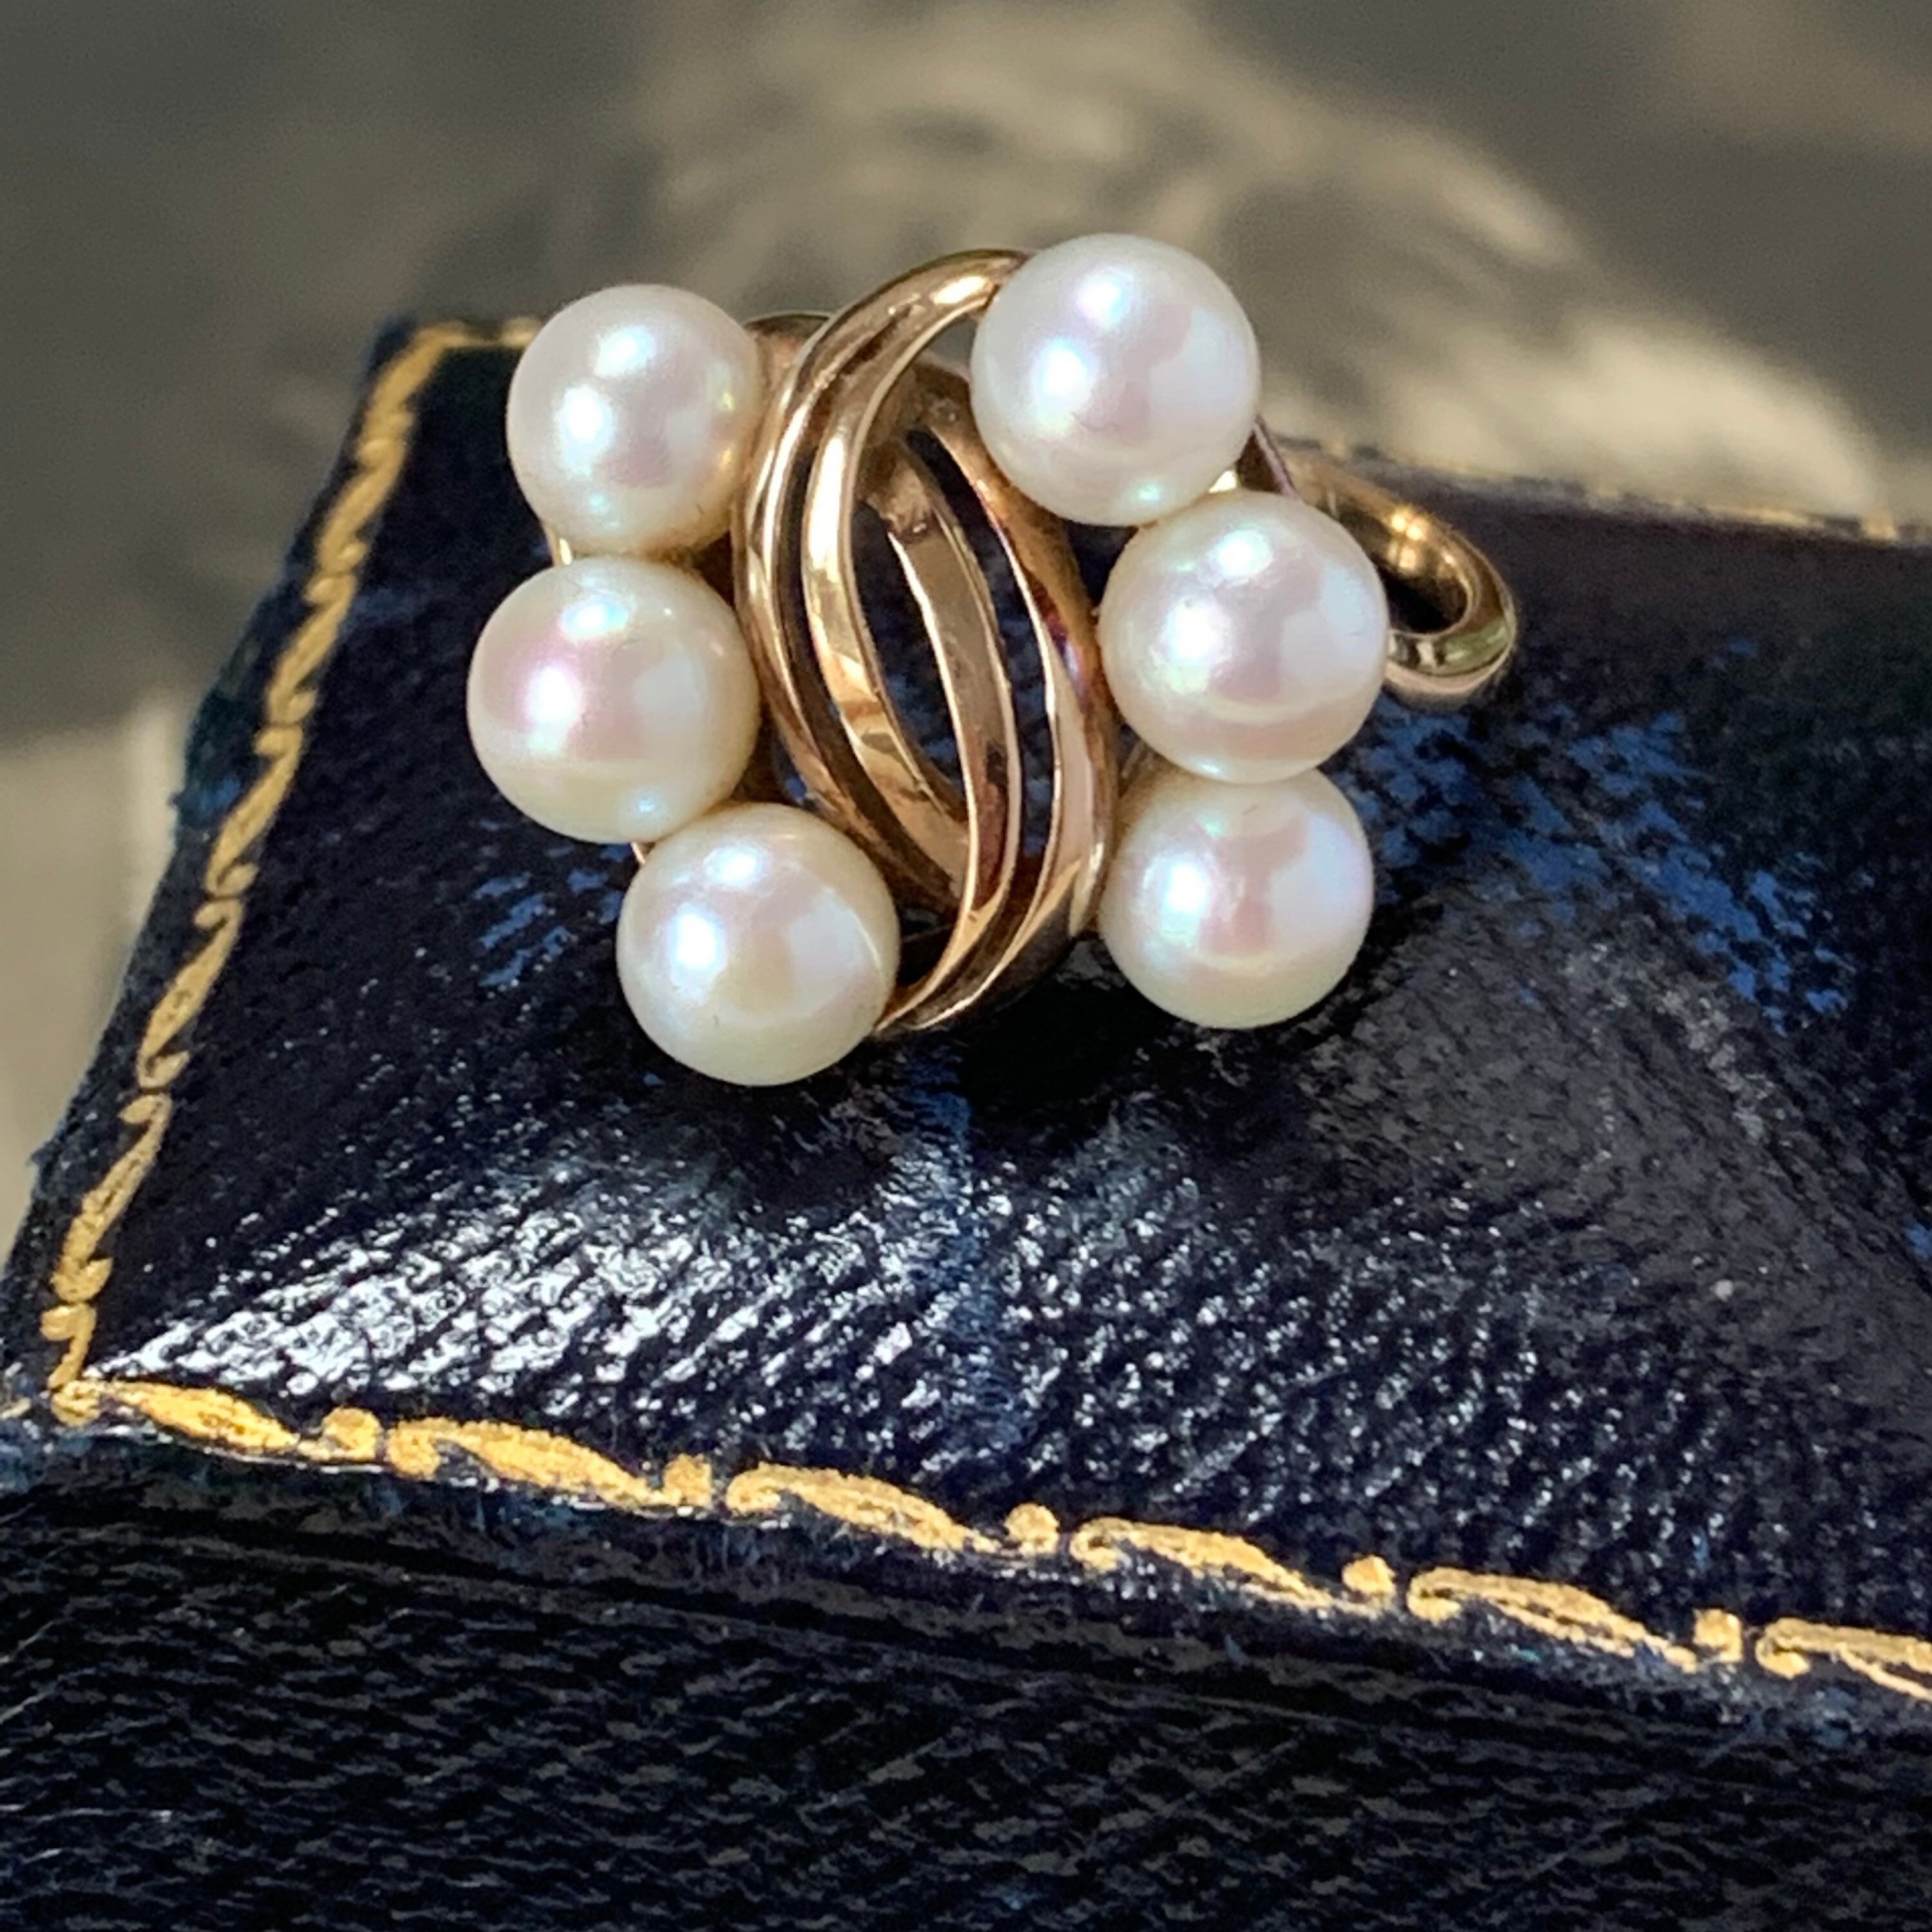 Exquisite Vintage Cultured Pearl Ring By Mikimoto Pearls, Crafted in 14K Yellow Gold. This Stunning Piece Features A Timeless Retro Design